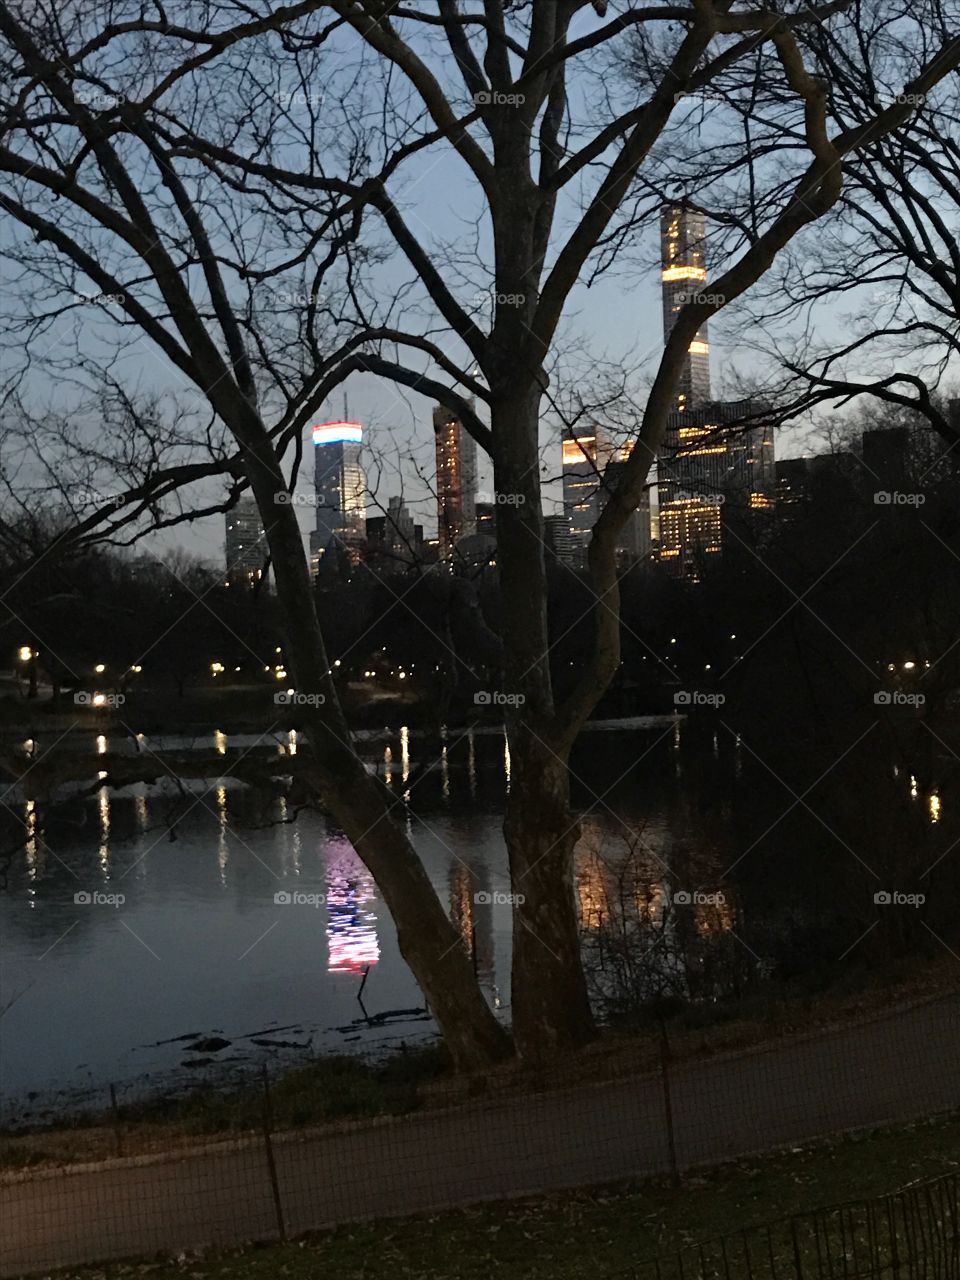 Evening reflections in Central Park, NYC 